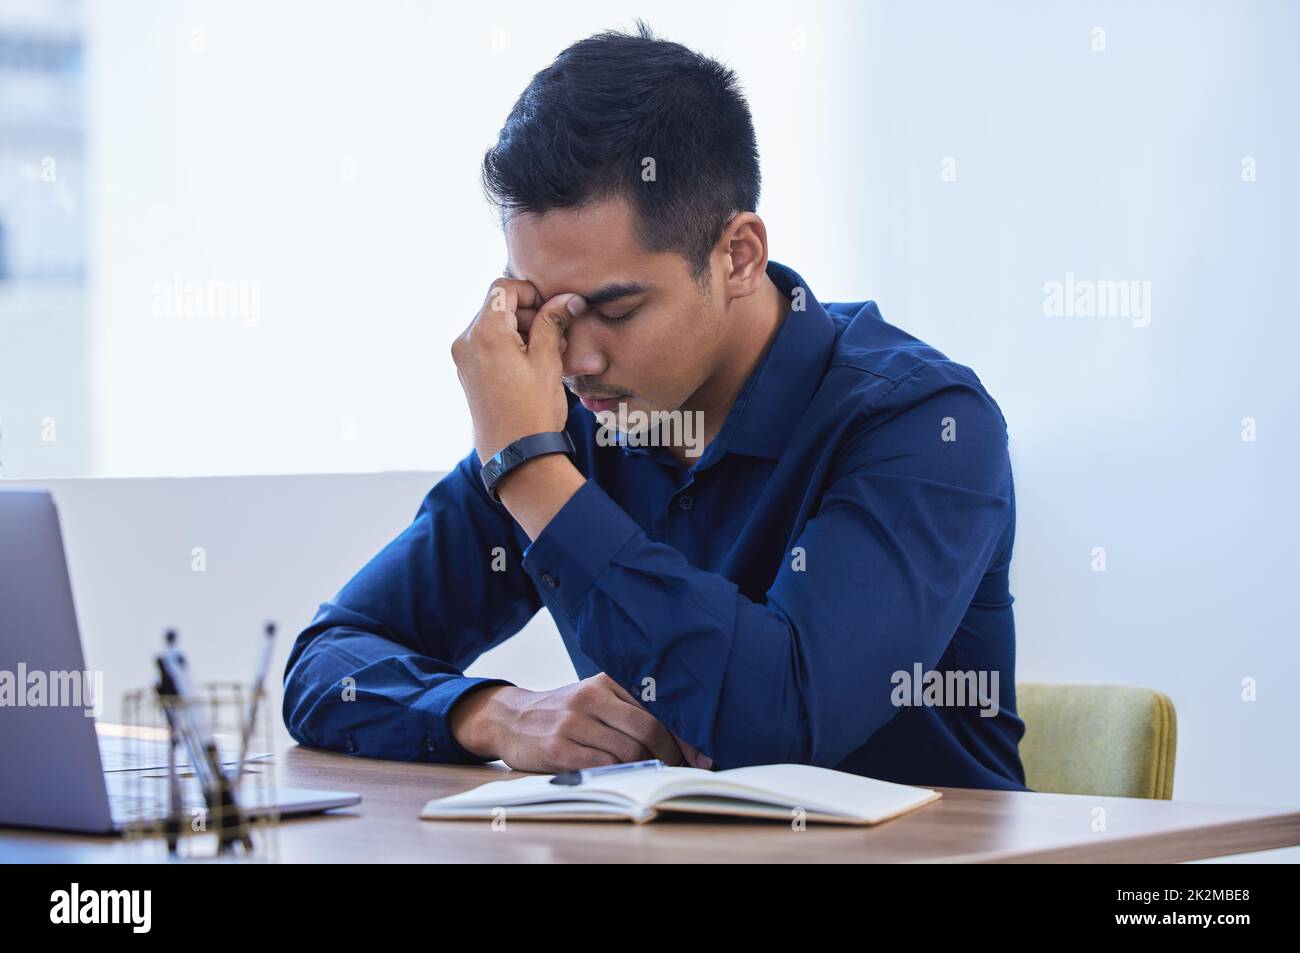 Overwhelmed with too much to do. Shot of a young businessman looking stressed out while working in an office. Stock Photo